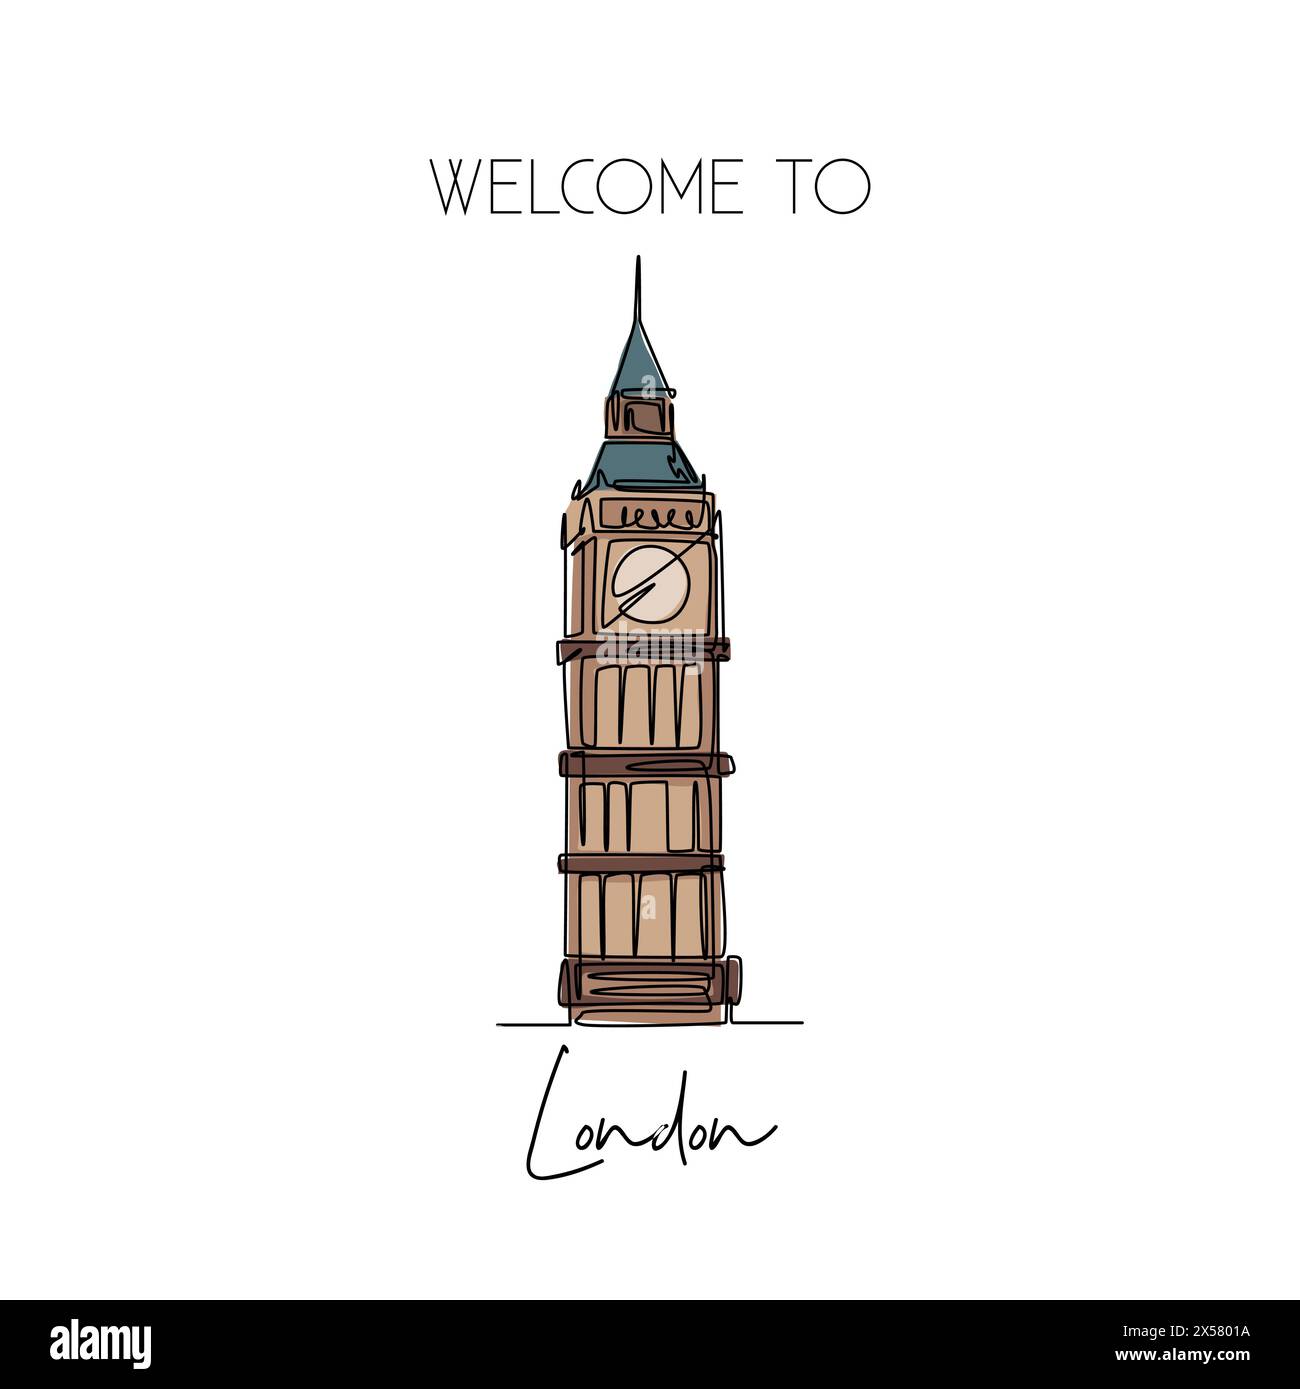 One continuous line drawing of welcome to Big Ben clock tower landmark. Beautiful iconic place in London. Home decor wall art poster print concept. Mo Stock Vector